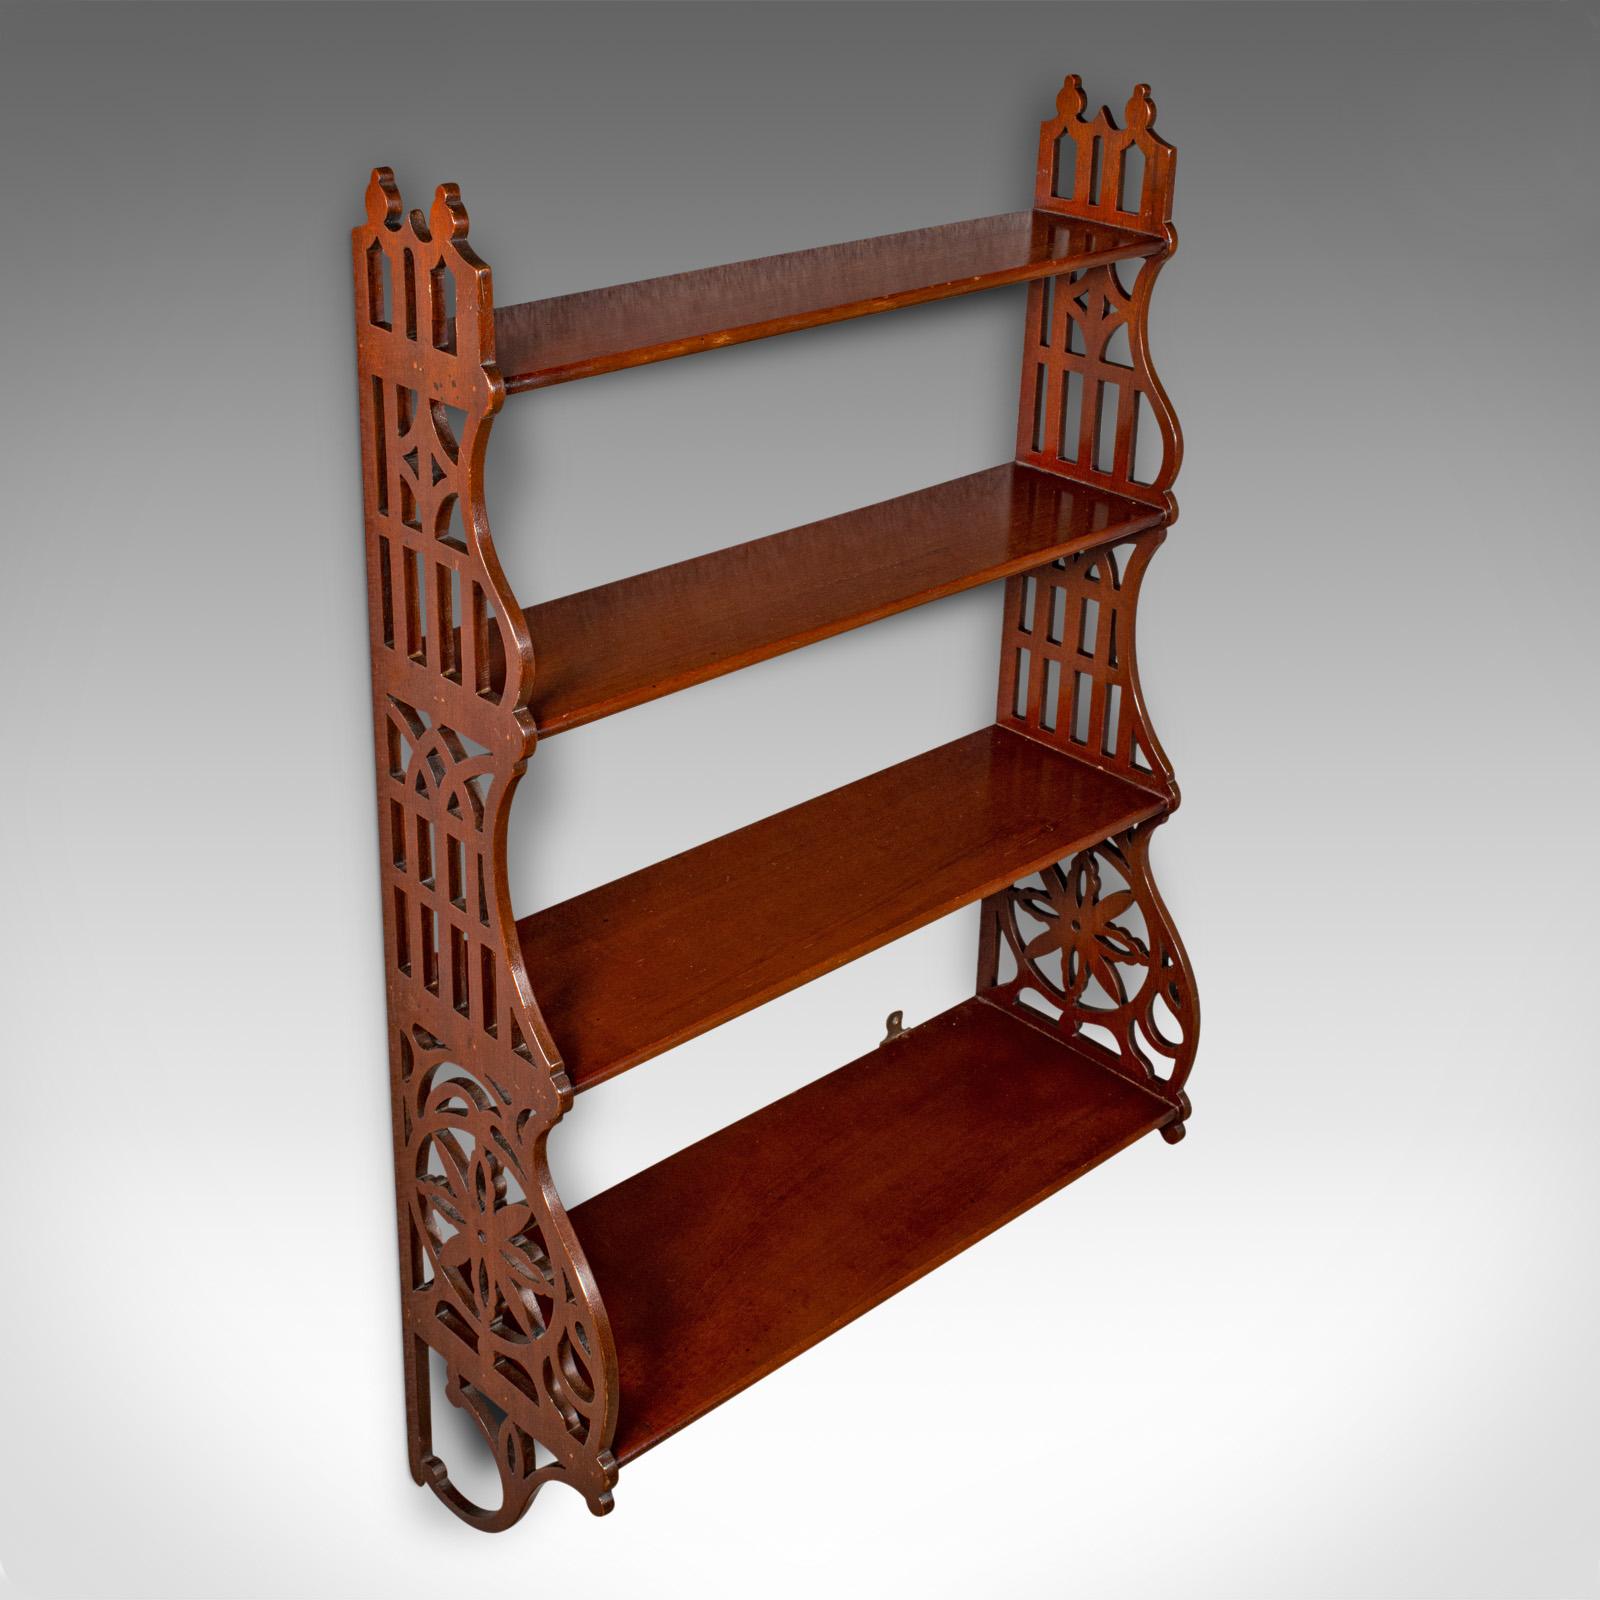 20th Century Antique 4-Tier Mounted Whatnot, English, Wall Display Shelves, Edwardian, C.1910 For Sale